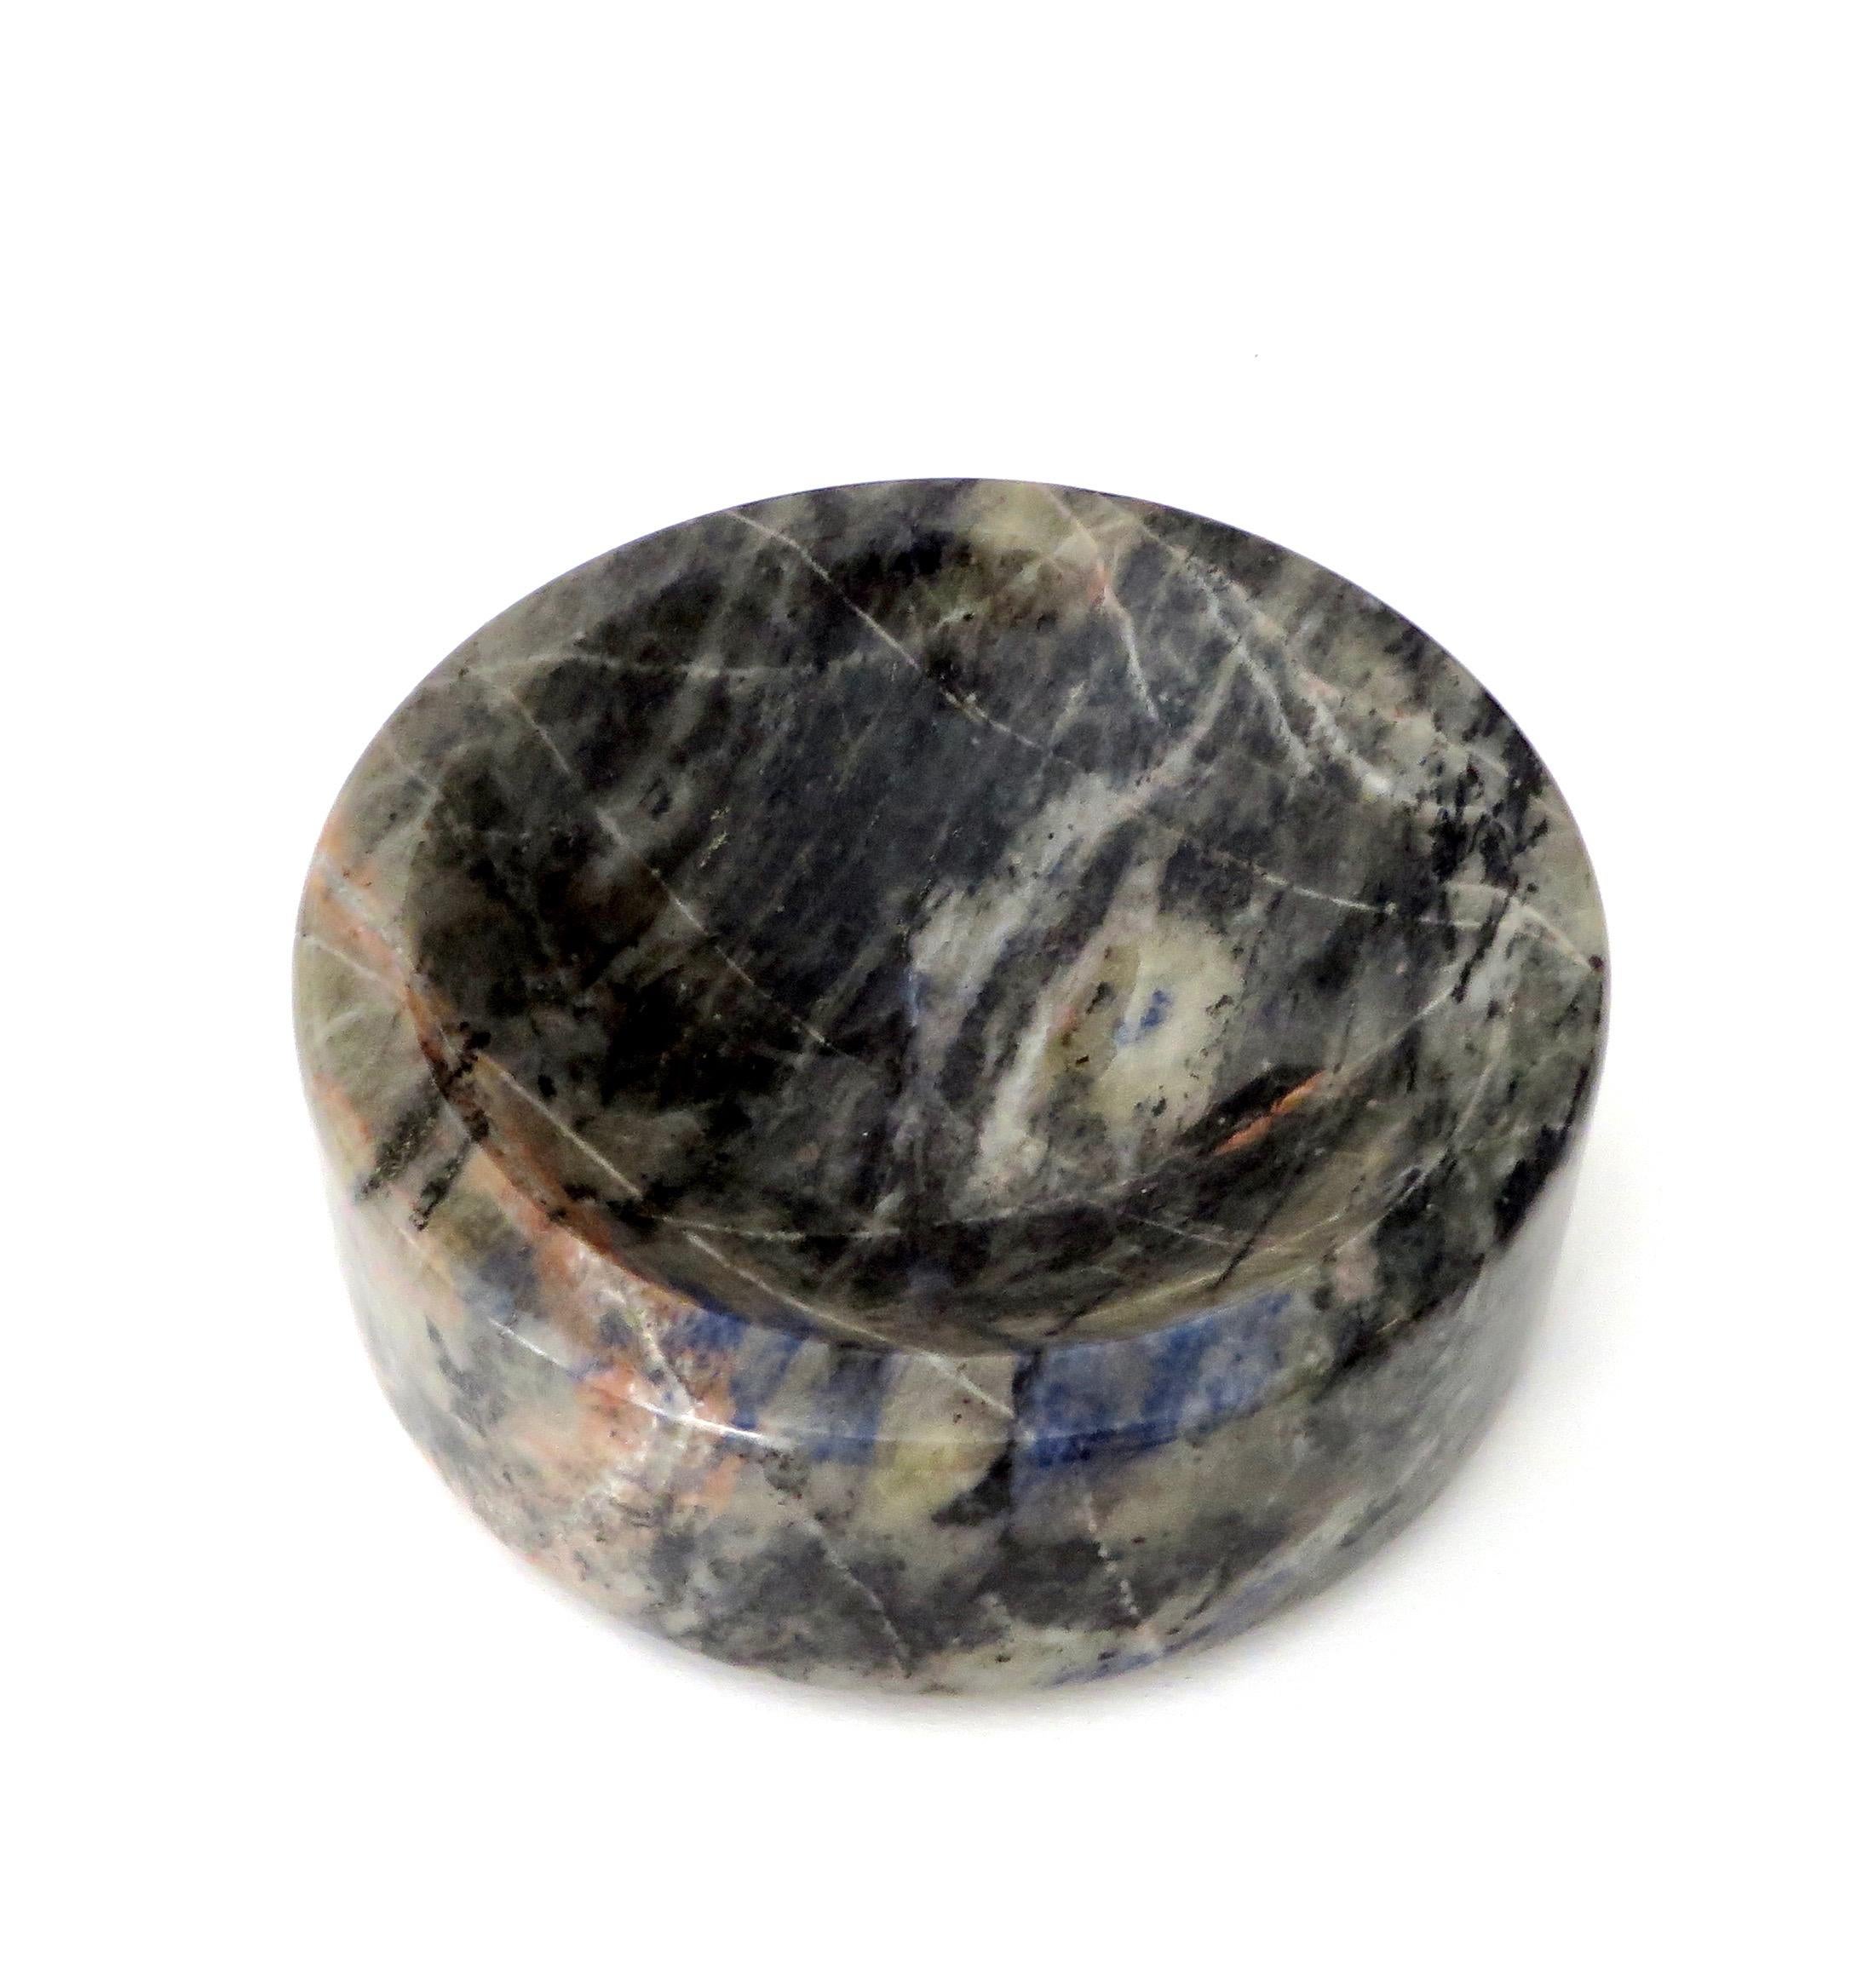 Mid-20th Century Italian Marble Bowl or Vide Poche Blue Lapis Colored Gray White Veined Marble